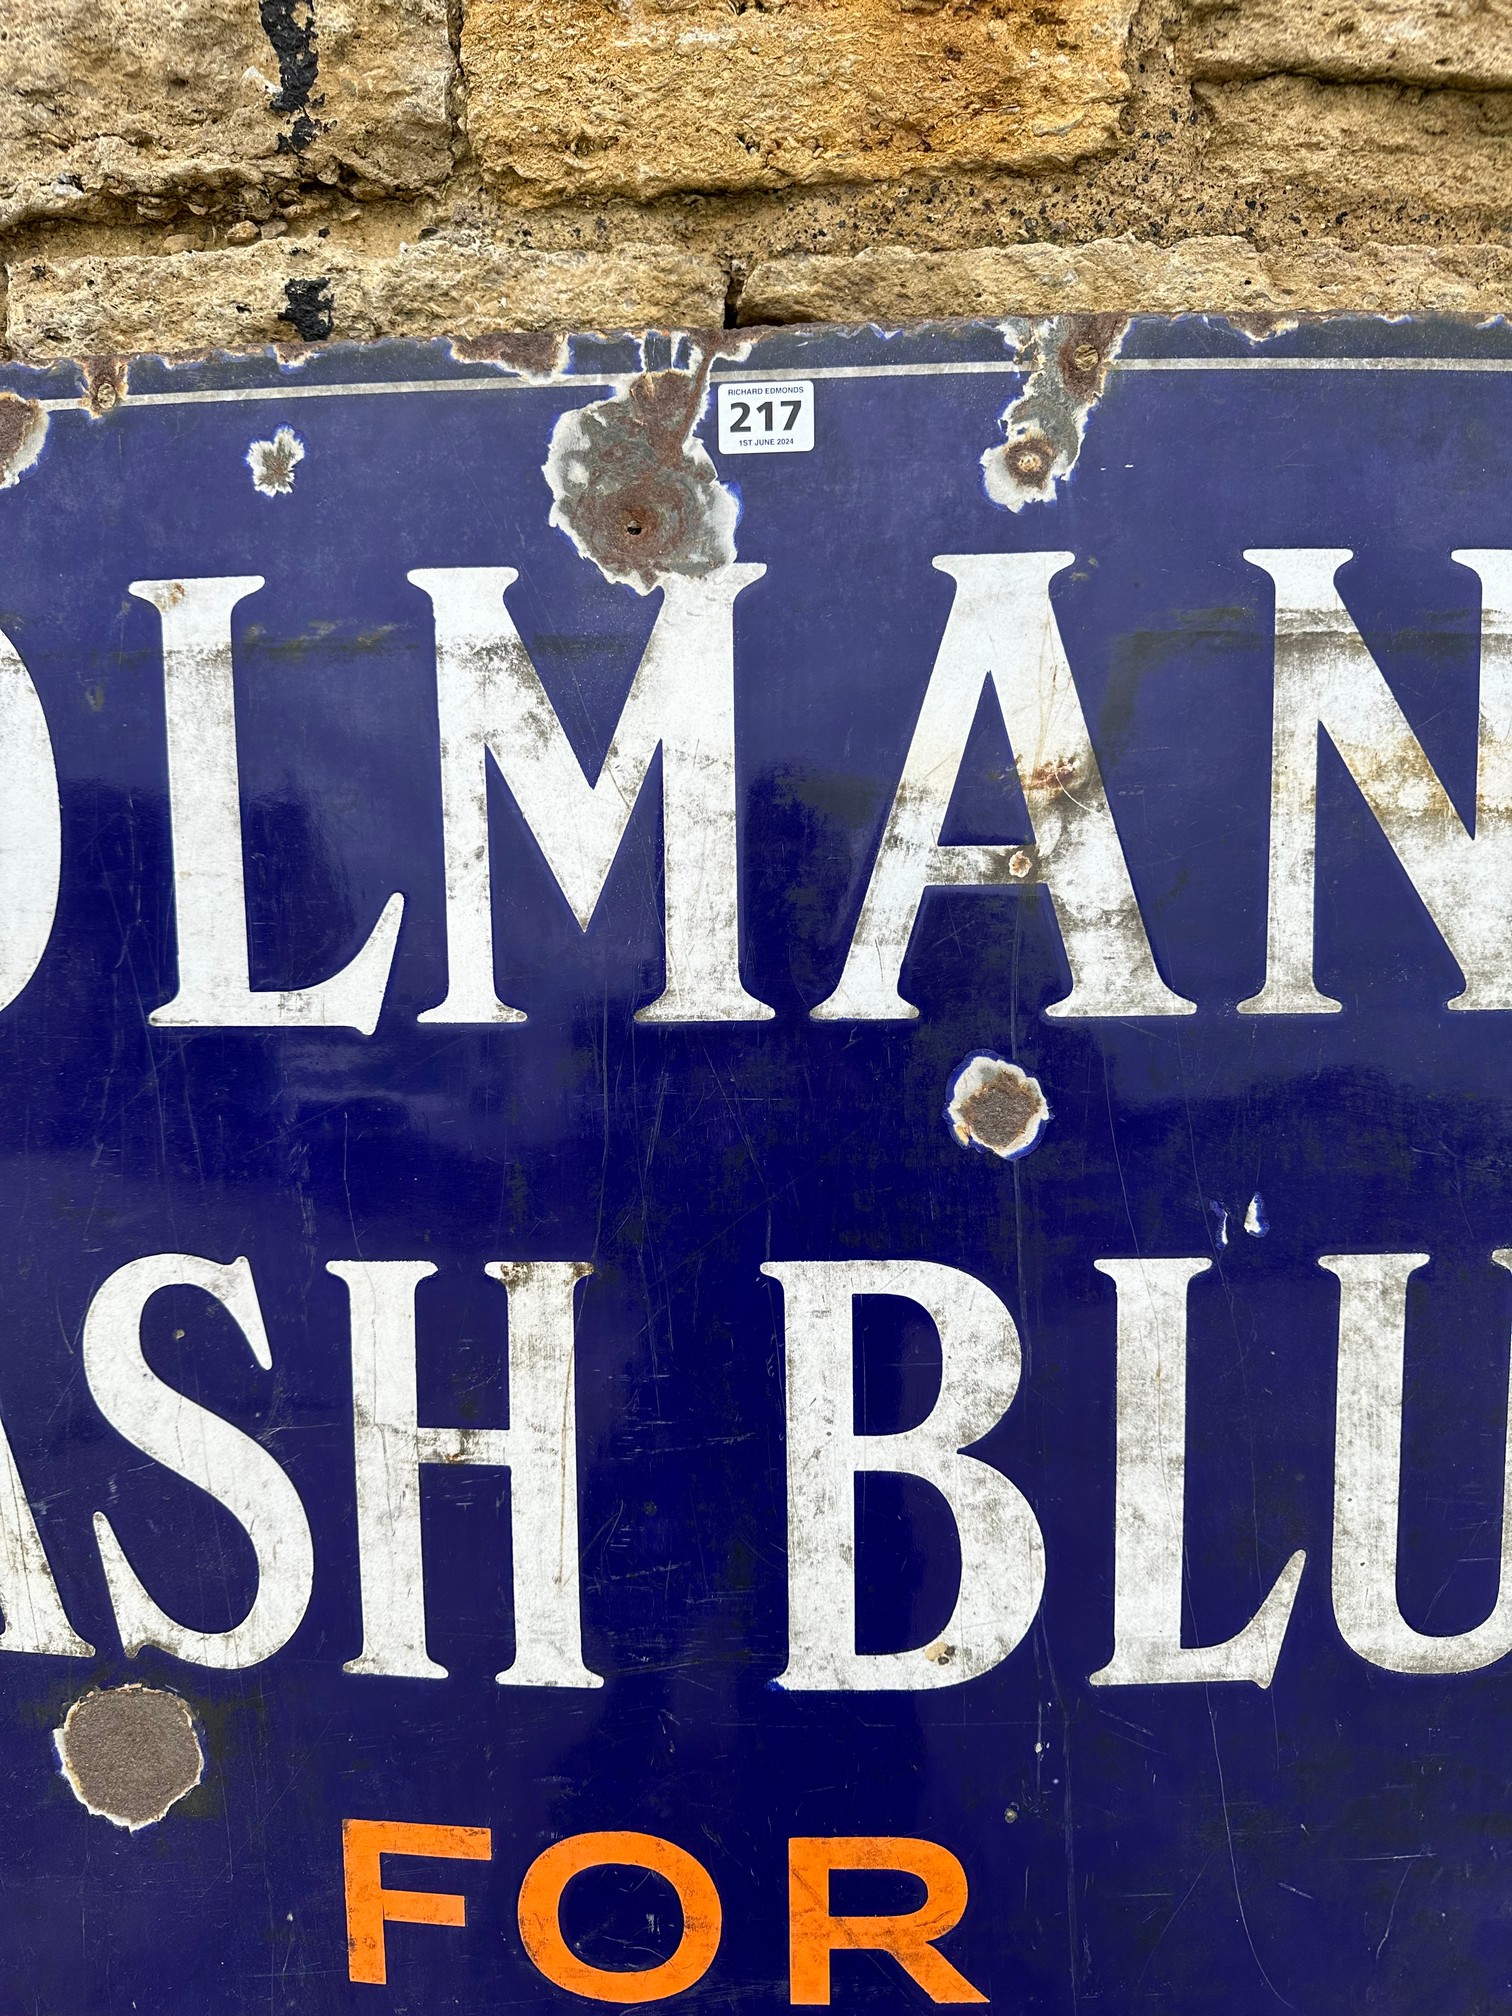 A Colman's Wash Blue - for Snow White Linen enamel advertising sign, 38 x 36". - Image 4 of 8